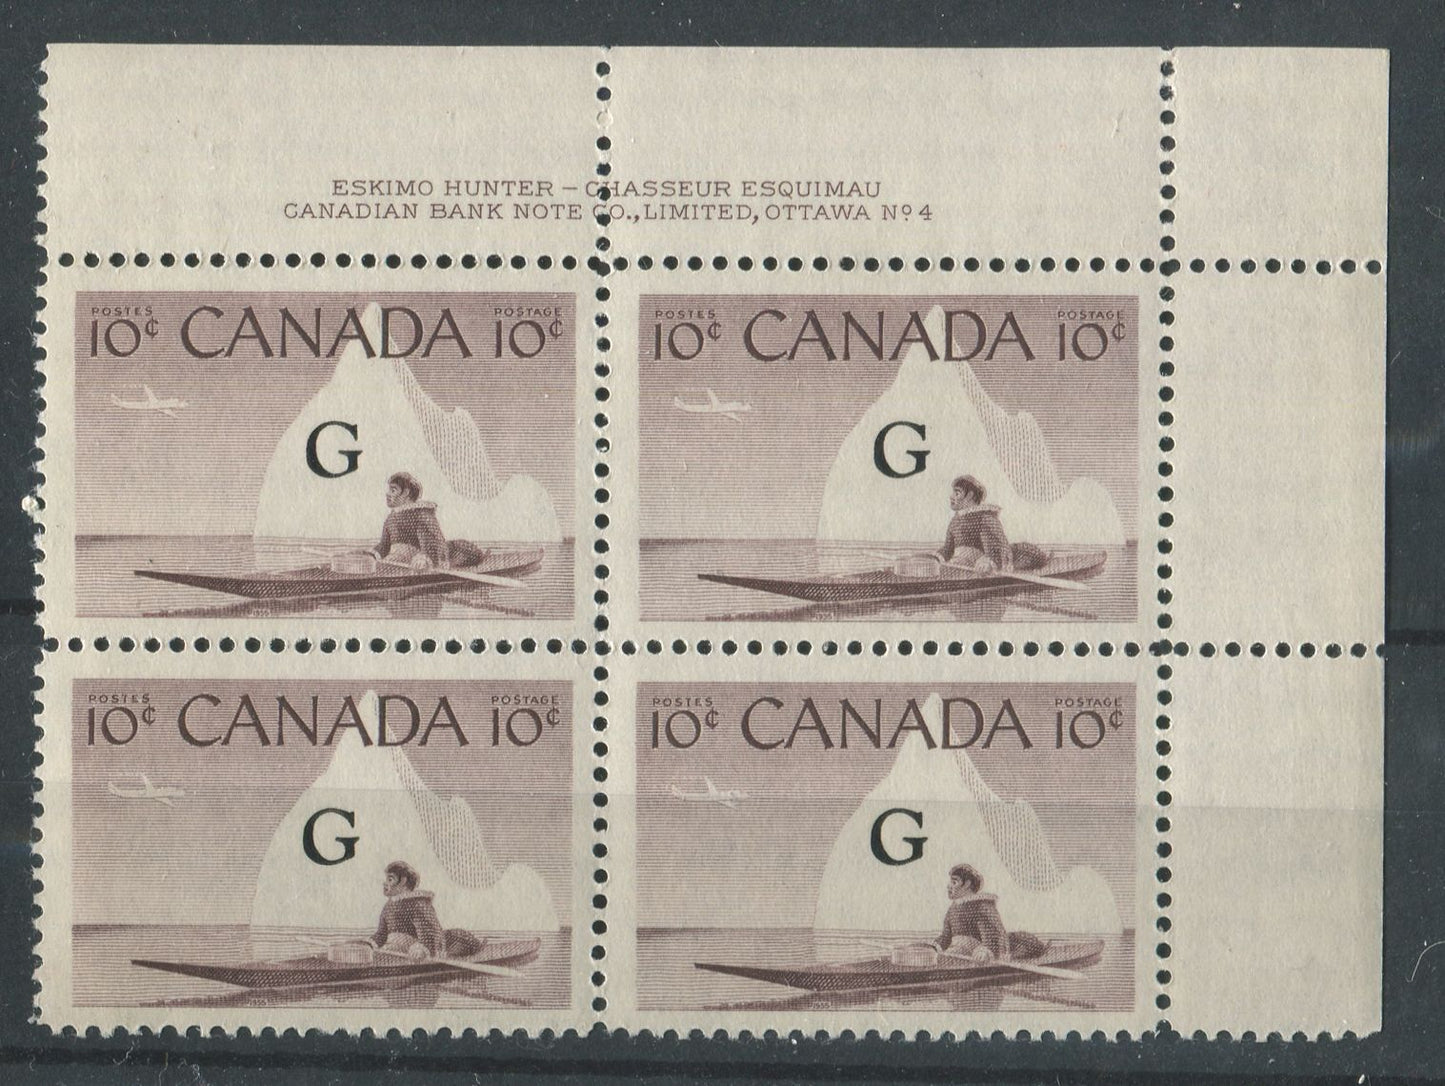 Canada #O39a (SG#O206a) 10c Inuk & Kayak 1954-62 Wilding Issue Plate 4 UR Flying G DF Iv Smooth Paper VF-75 NH Brixton Chrome 